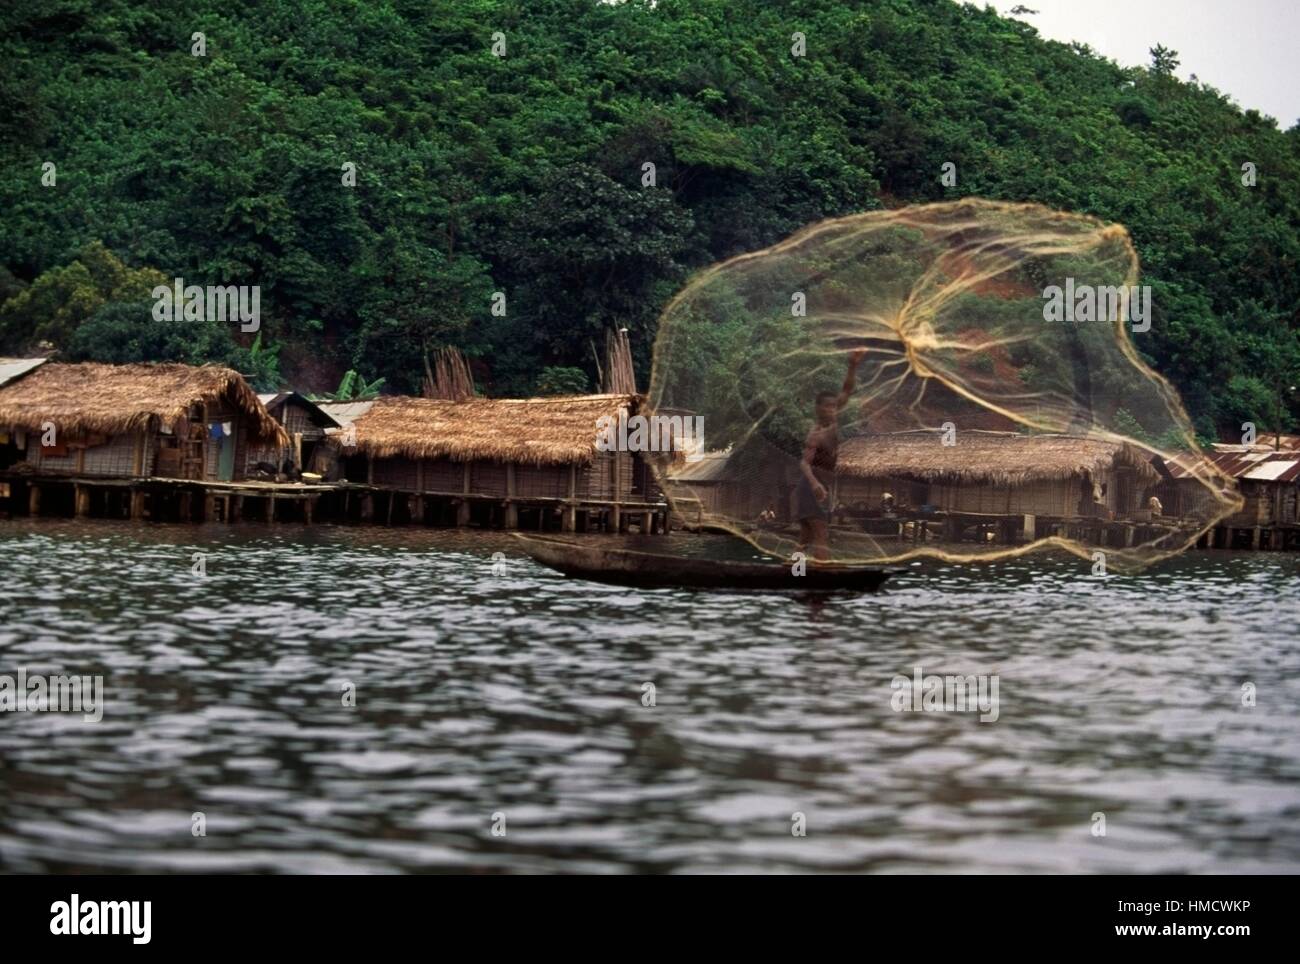 https://c8.alamy.com/comp/HMCWKP/casting-nets-in-front-of-houses-built-on-water-pile-dwellings-tiagba-HMCWKP.jpg